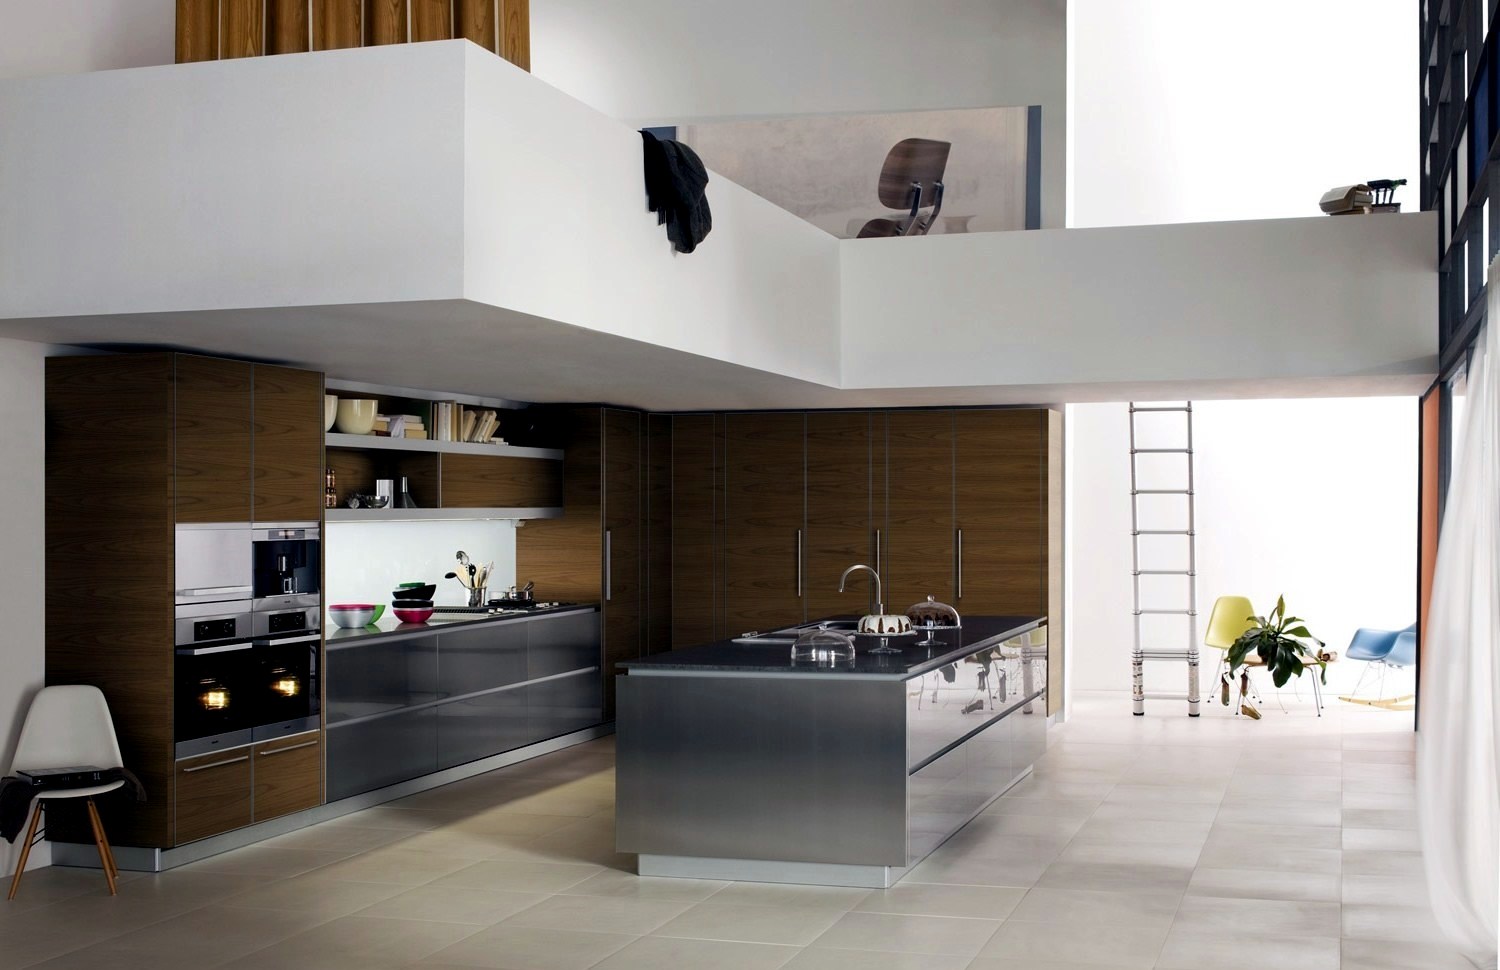 Kitchen design with personality